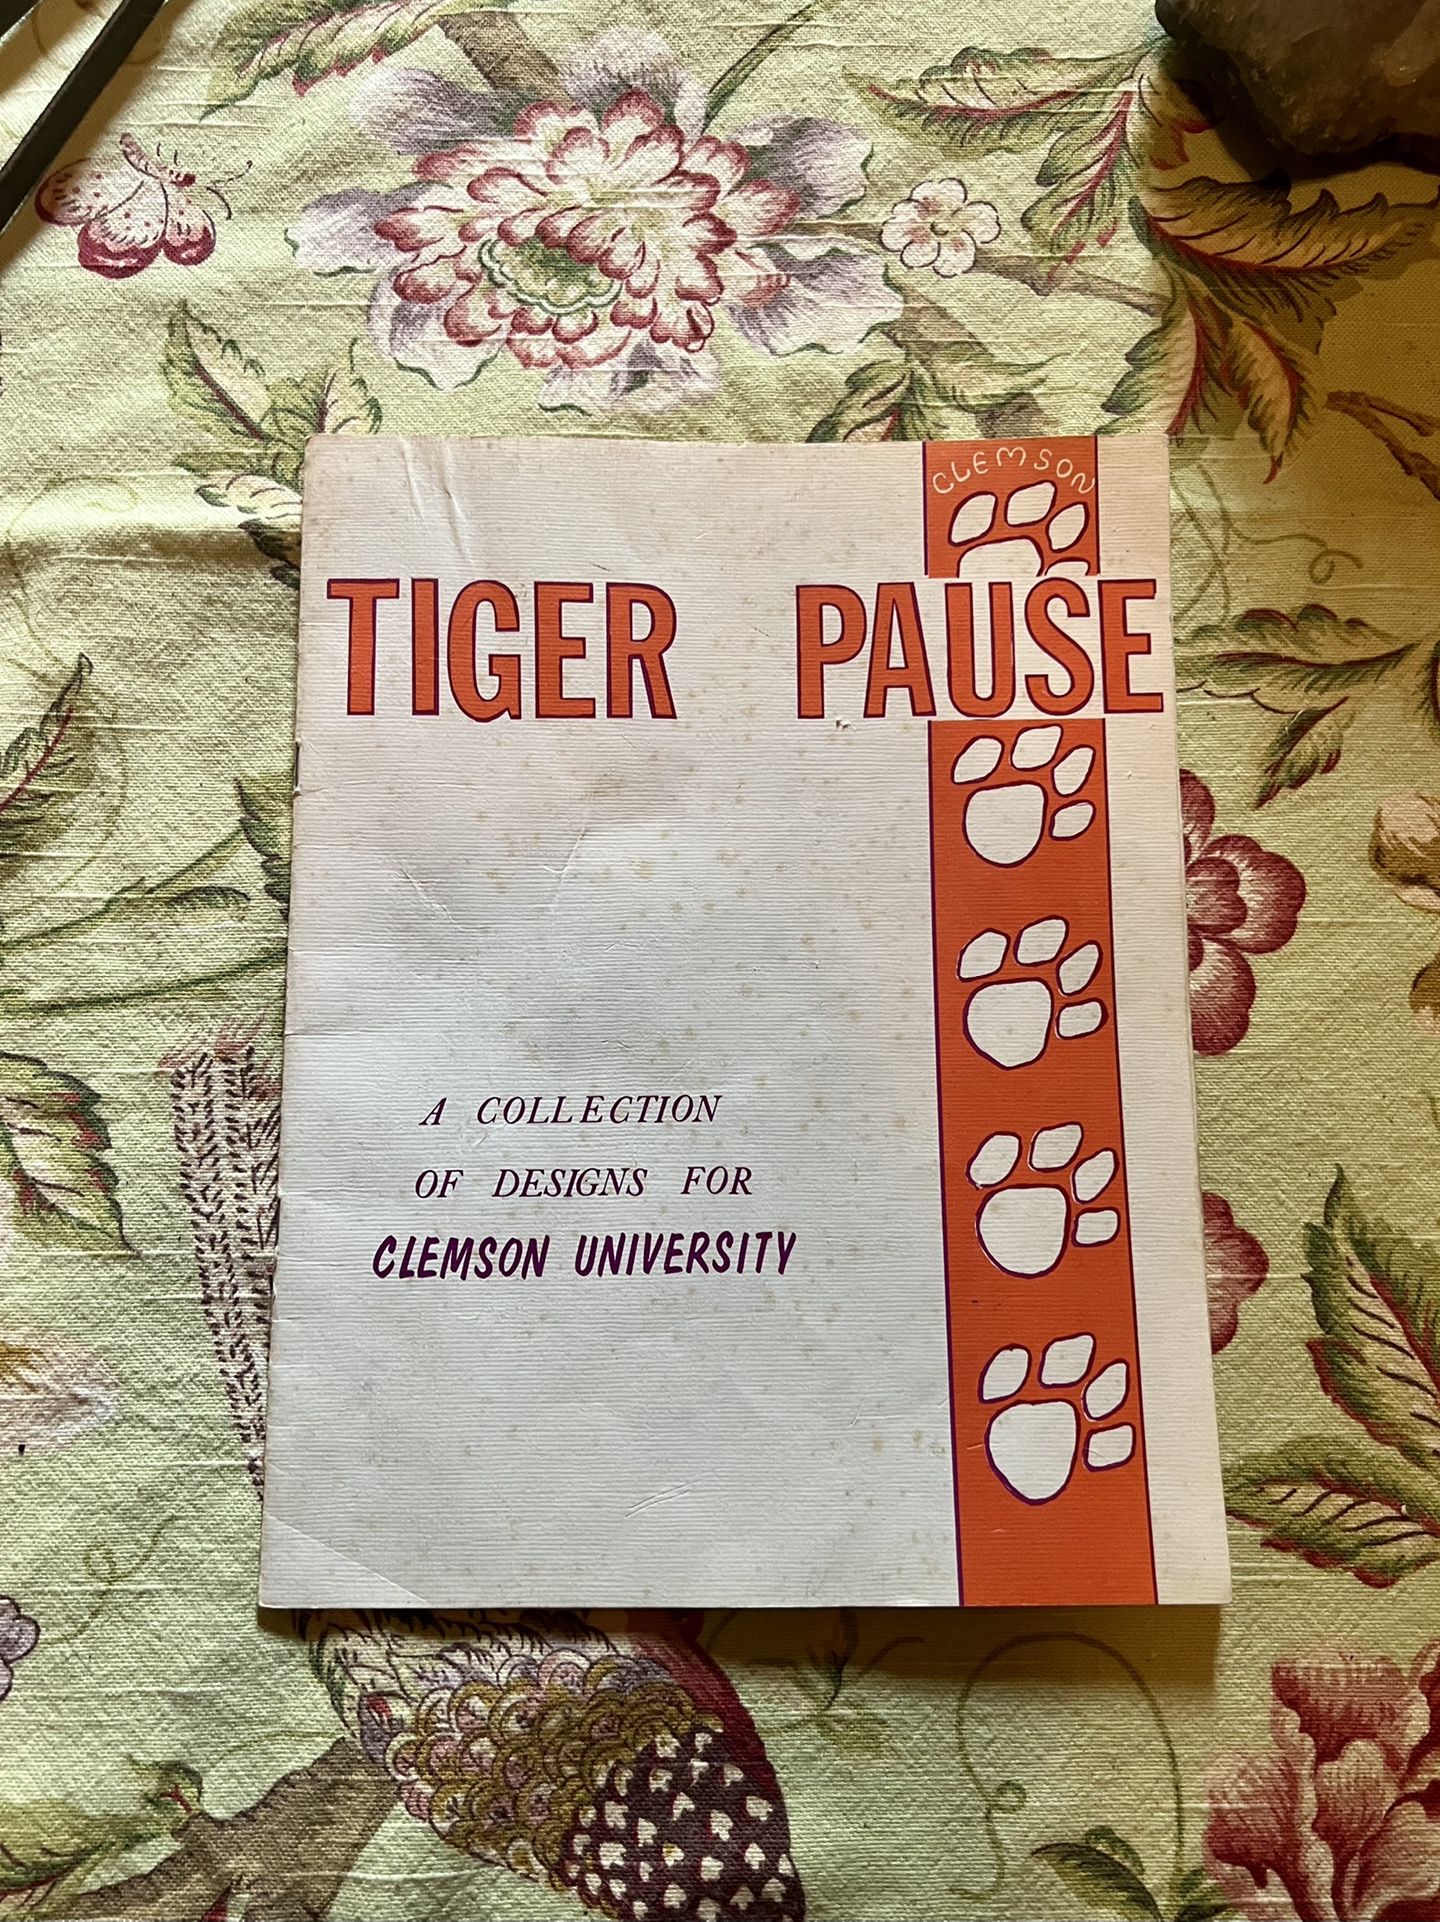 1980 Vintage Cross-Stitch Album - TIGER PAUSE: A COLLECTION OF DESIGNS FOR CLEMSON UNIVERSITY From Three Needles - Rare, Collector’s Piece! 